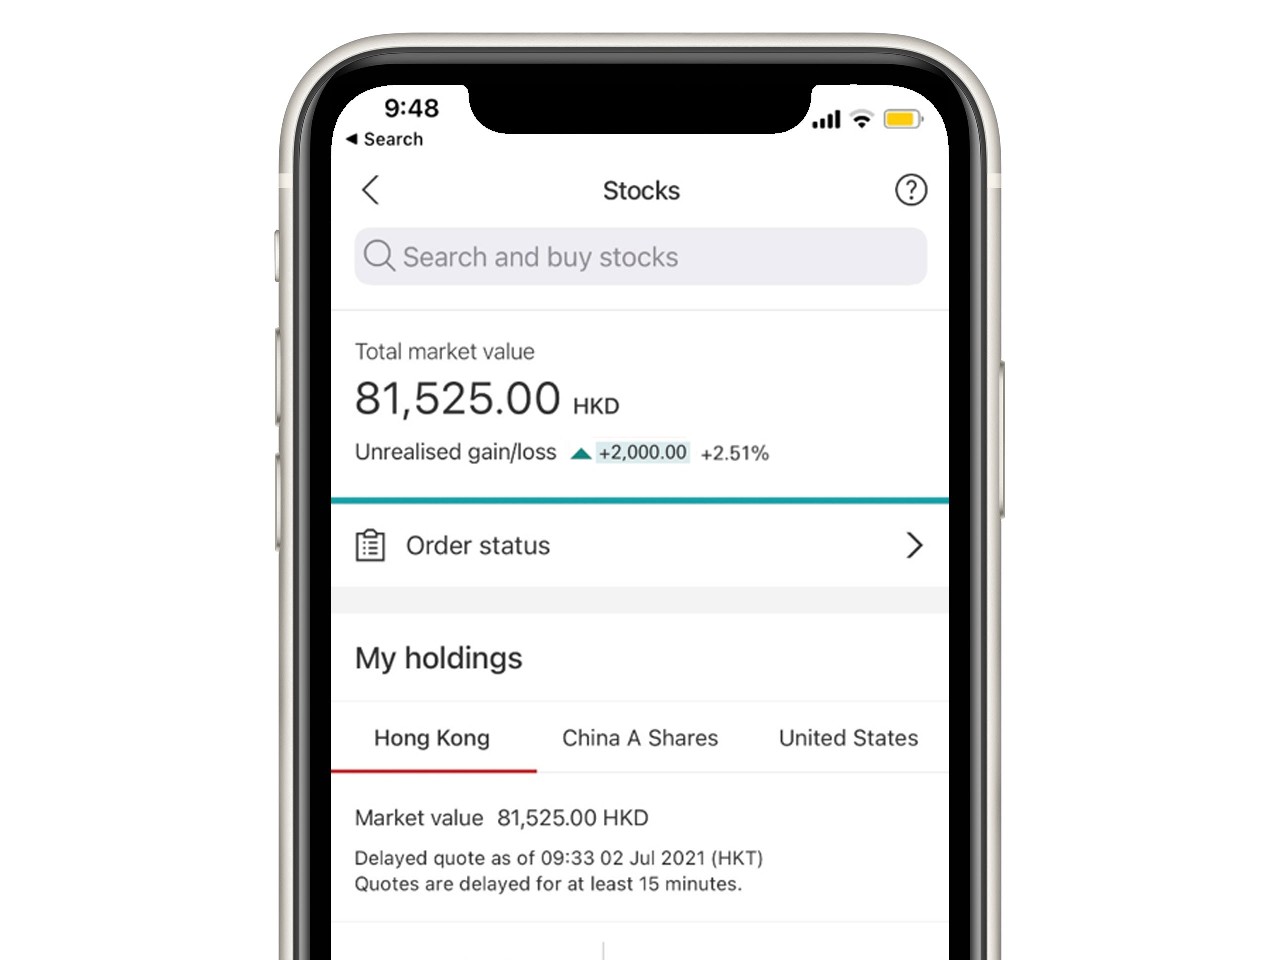 A mobile app screen showing the market value of the investment holdings